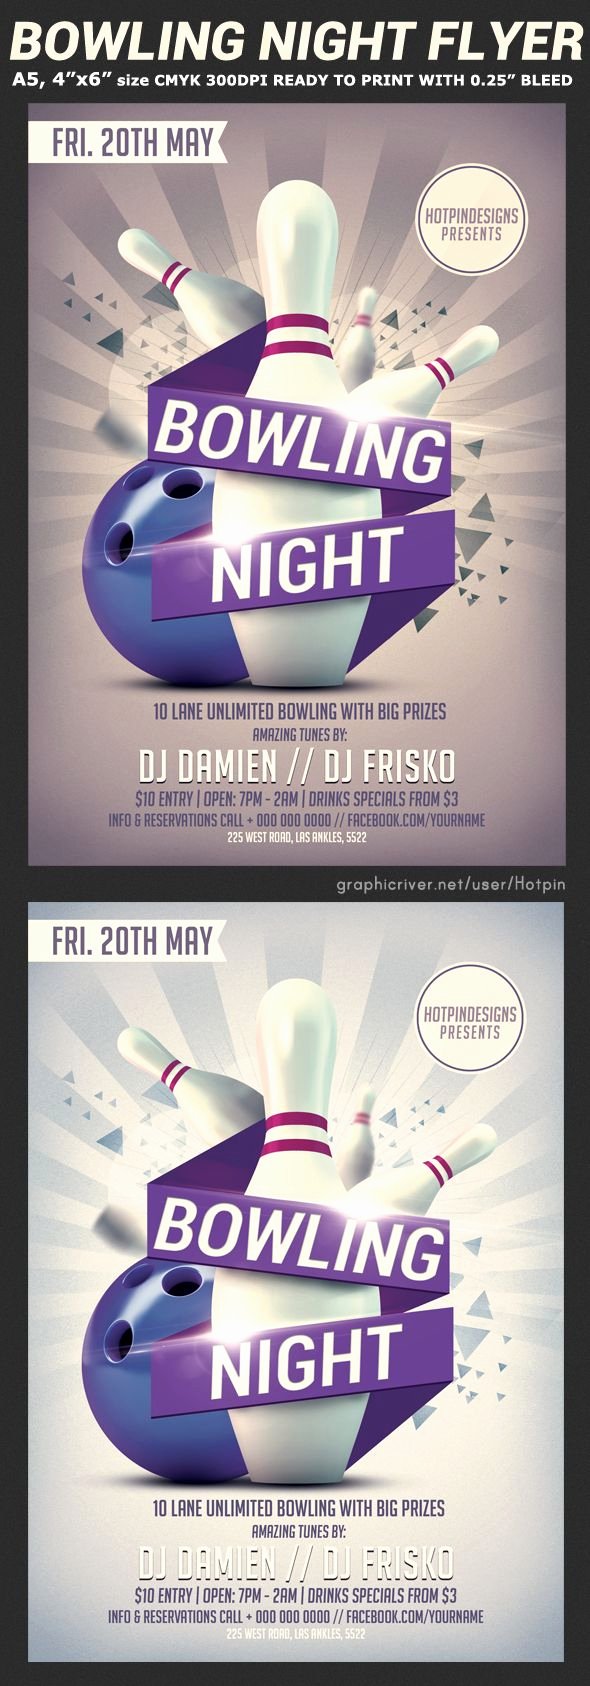 Bowling Flyer Template Free New Bowling Night Flyer Template V2 On Behance